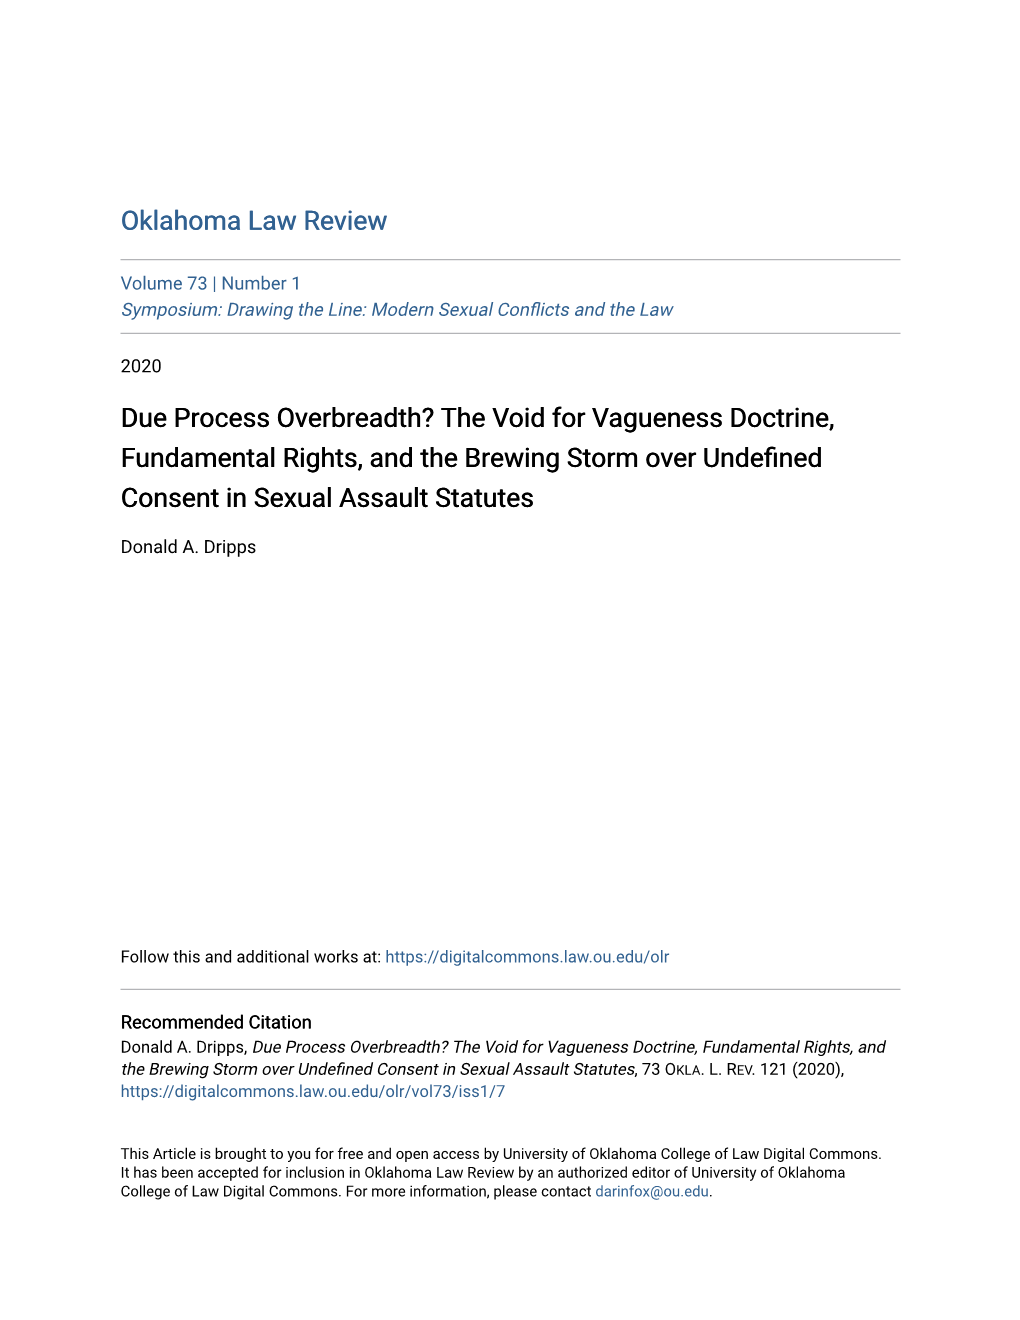 Due Process Overbreadth? the Void for Vagueness Doctrine, Fundamental Rights, and the Brewing Storm Over Undefined Consent in Sexual Assault Statutes